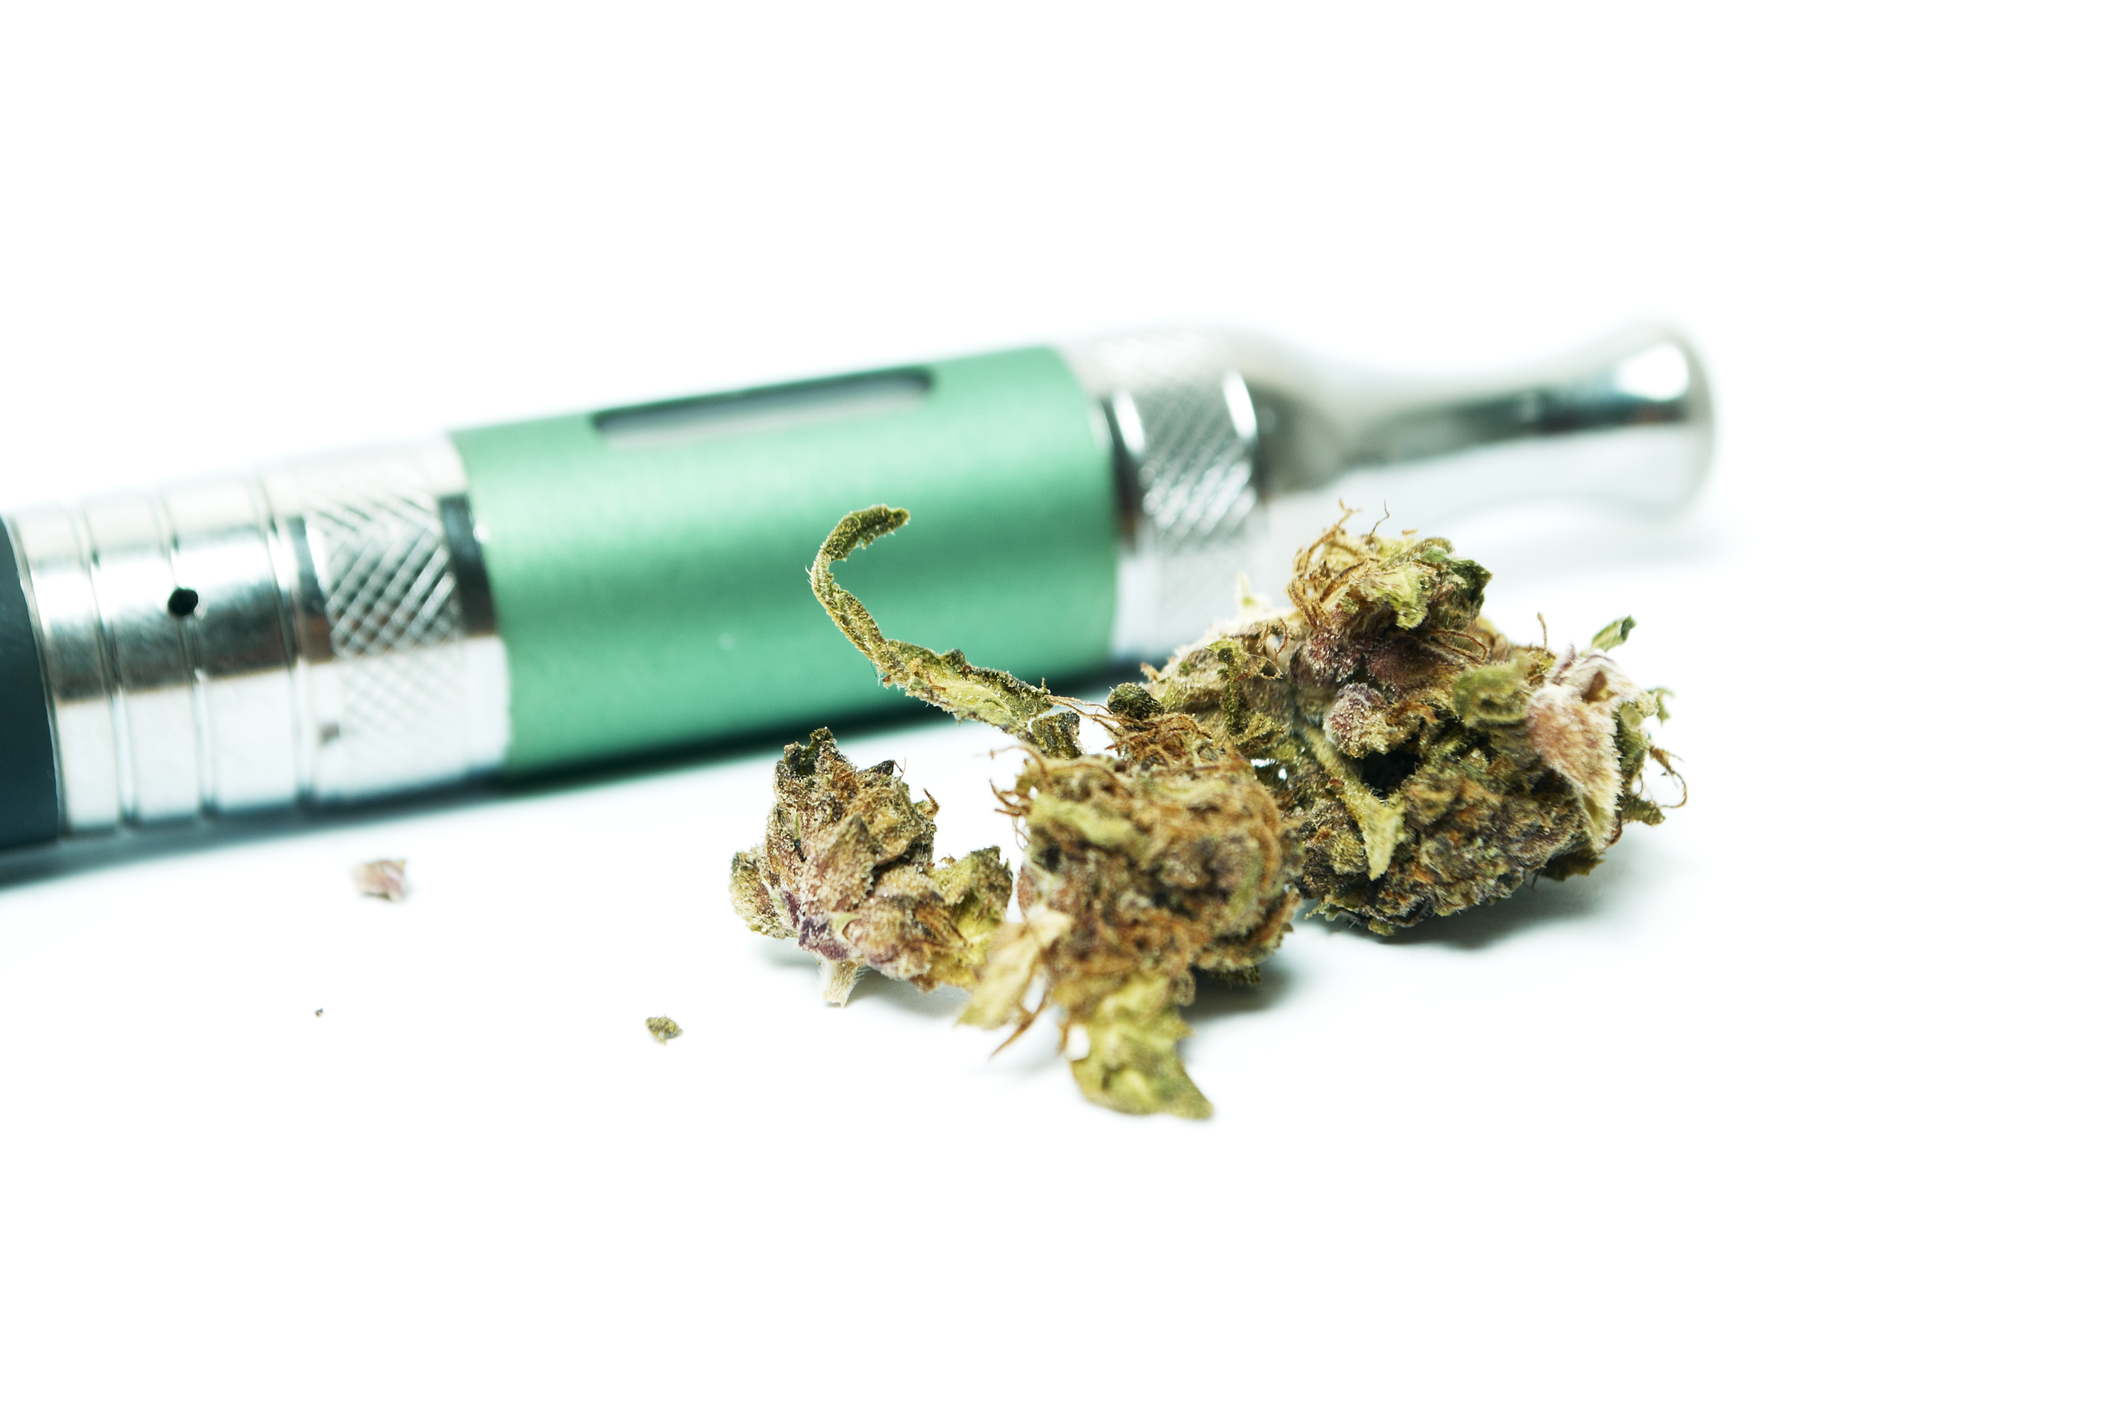  Study: States With Legal THC had Fewer EVALI Cases